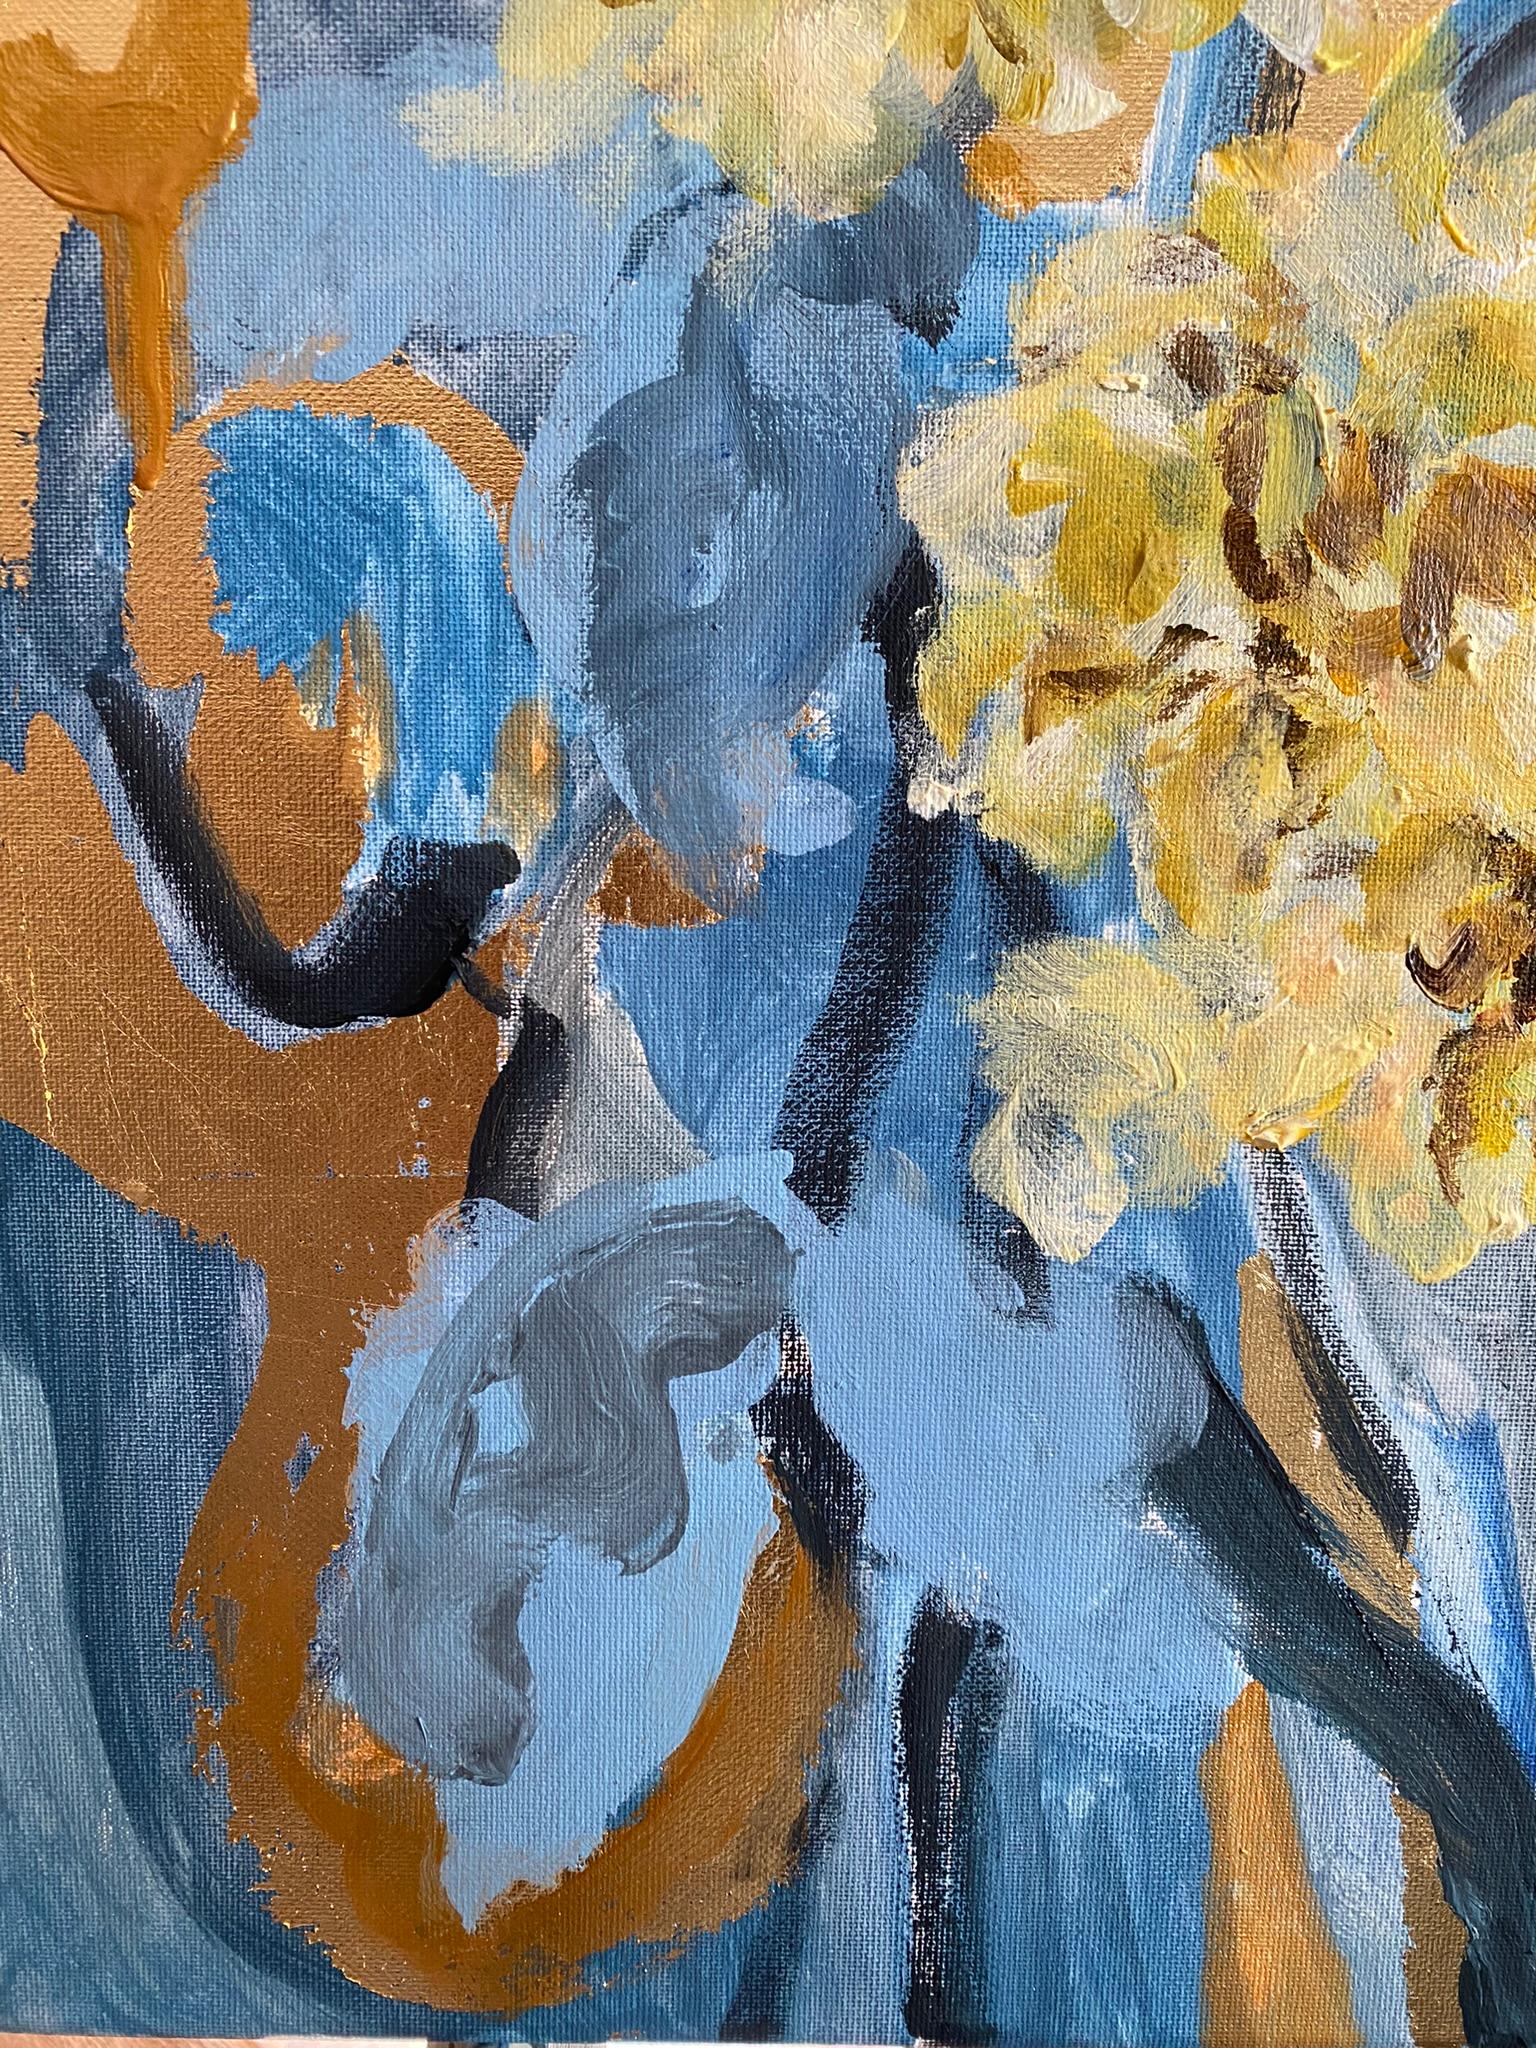 Original-Dahlias and Small Copper-Gold leaf-UK Award Artist-Abstract-impression 4